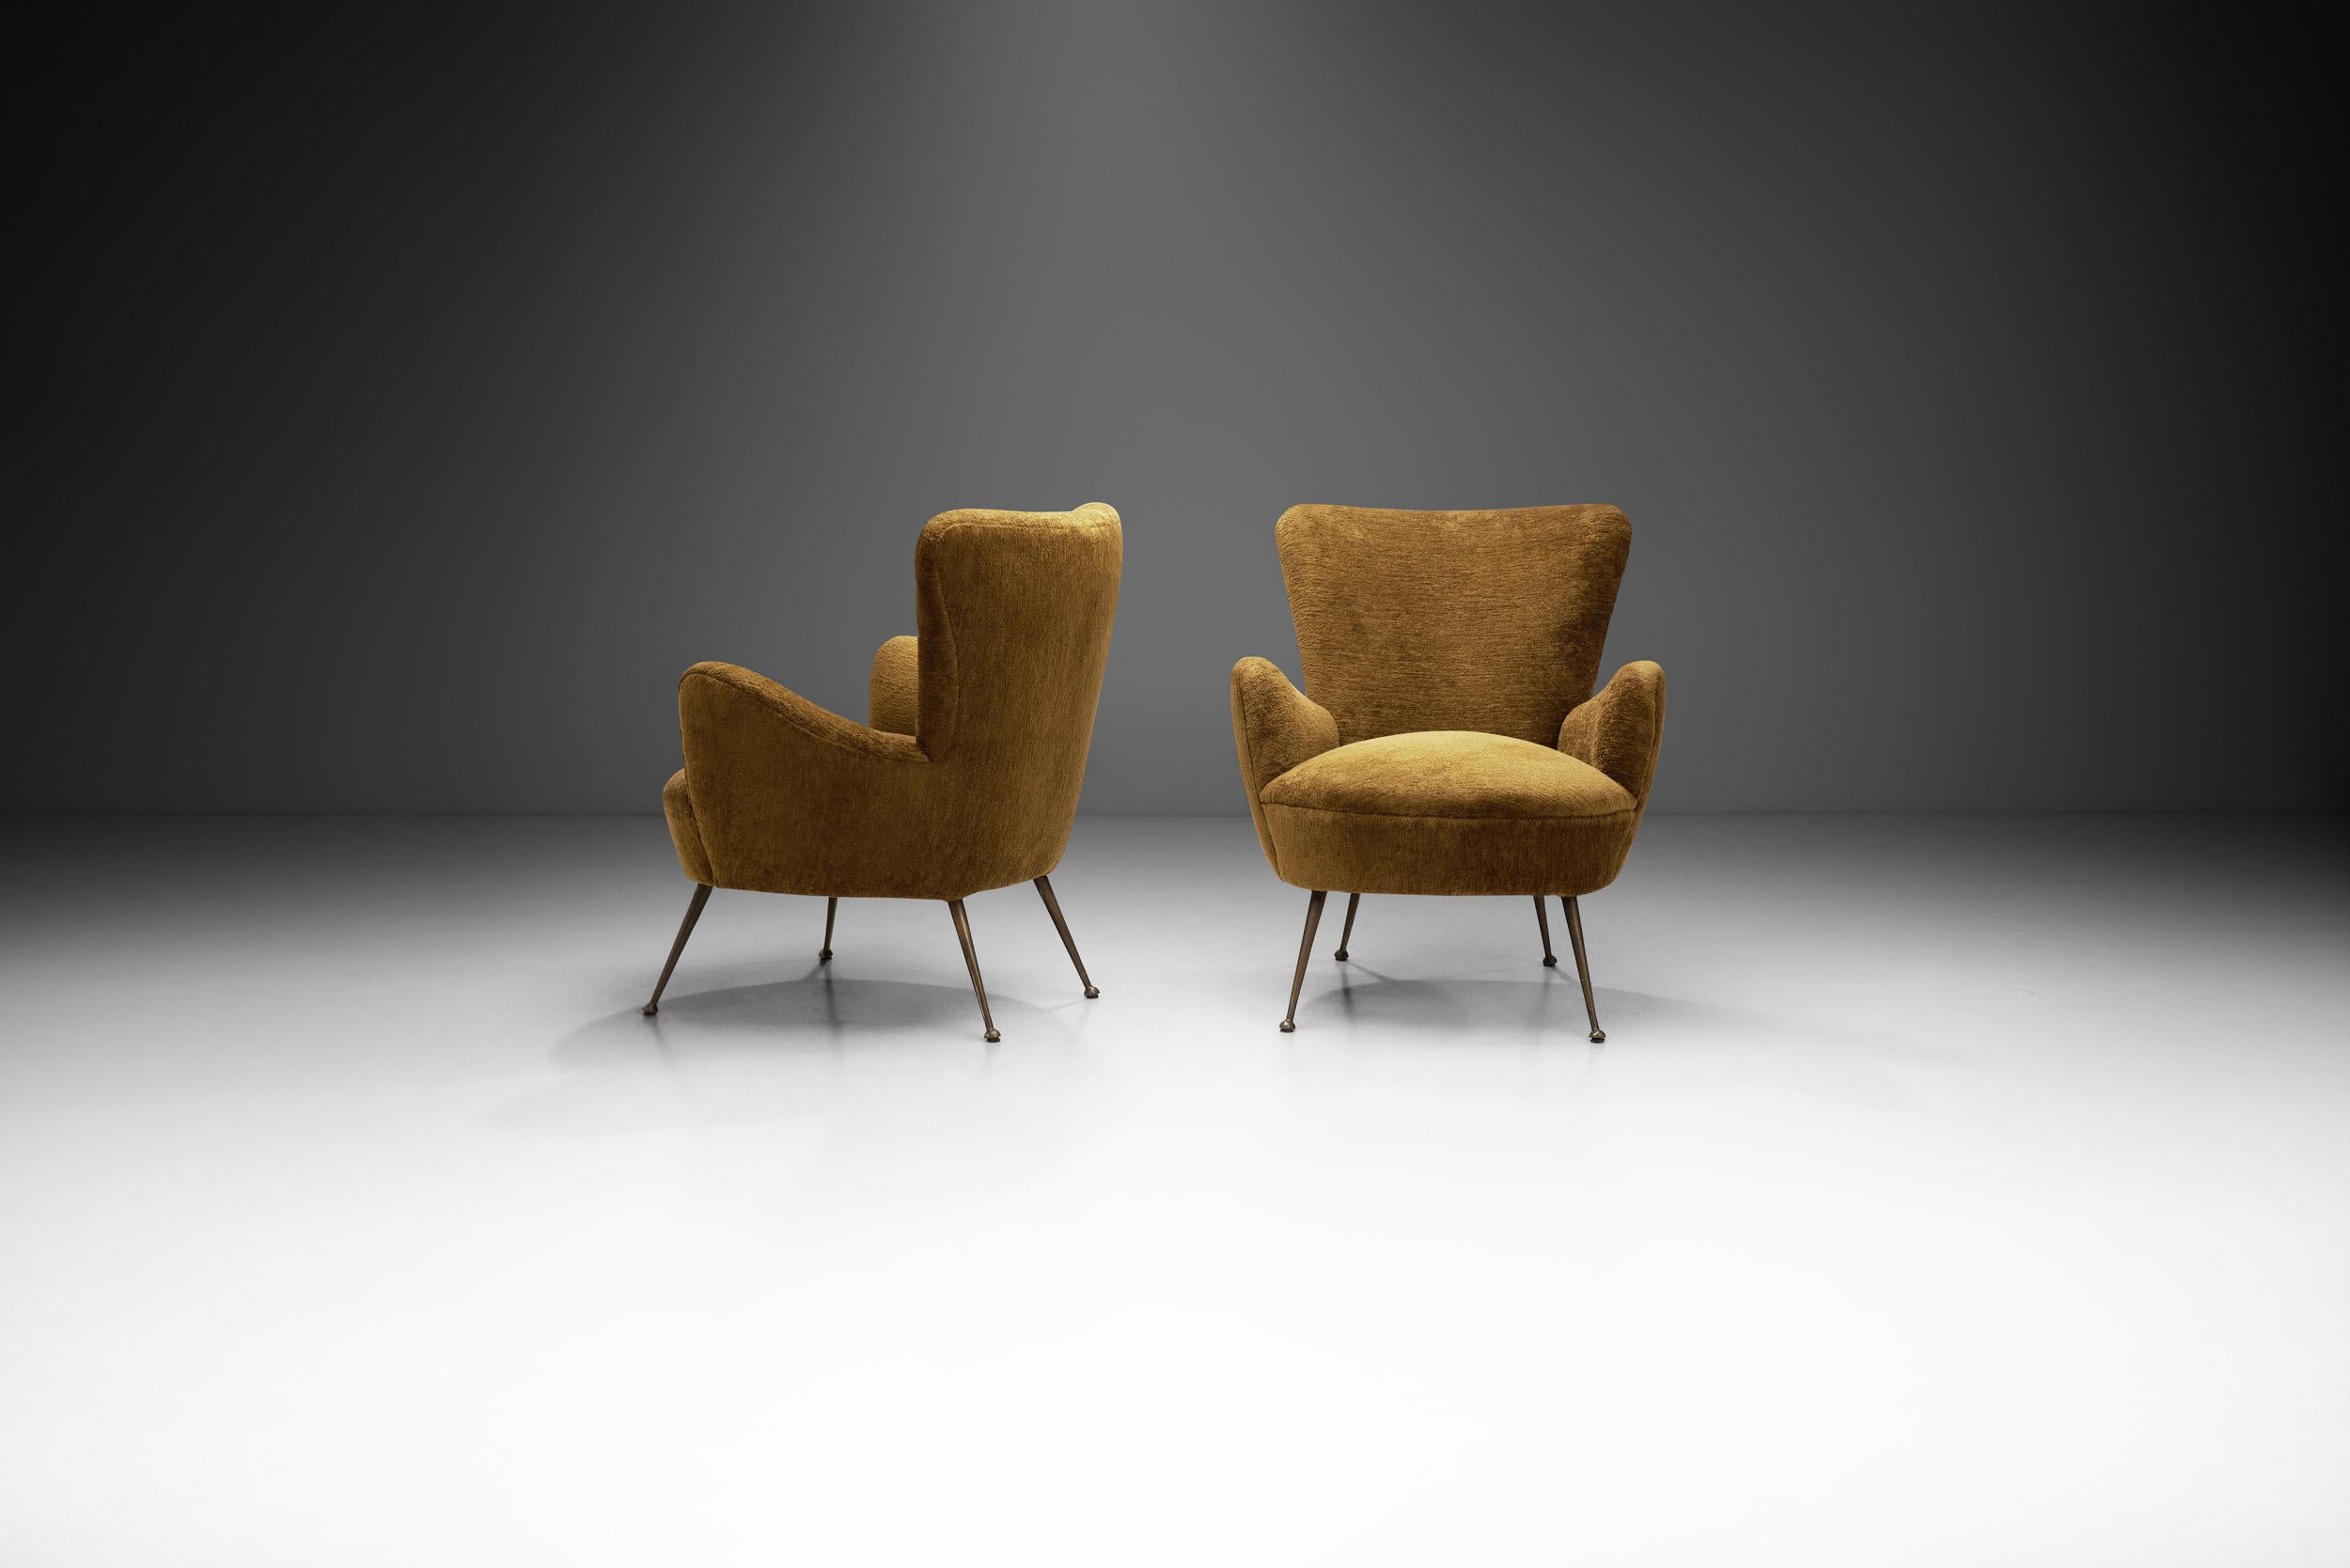 Mid-20th Century Italian Modern Armchairs with Brass Legs, Italy, 1960s For Sale